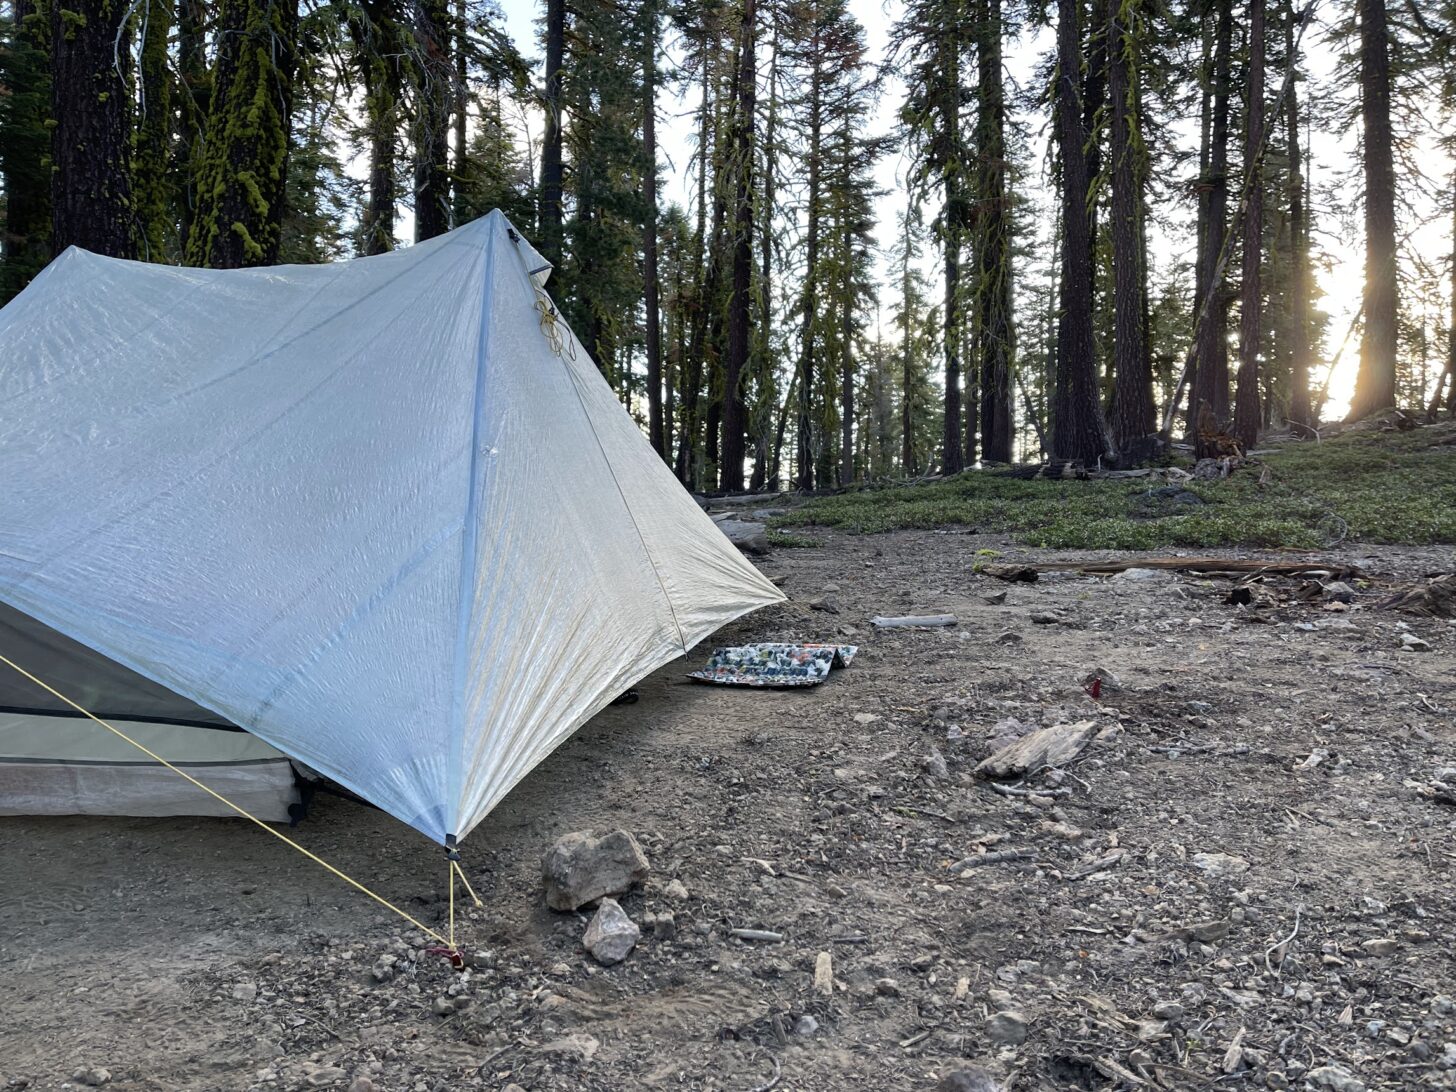 A tarptent Dipole 2 at sunset in a campsite